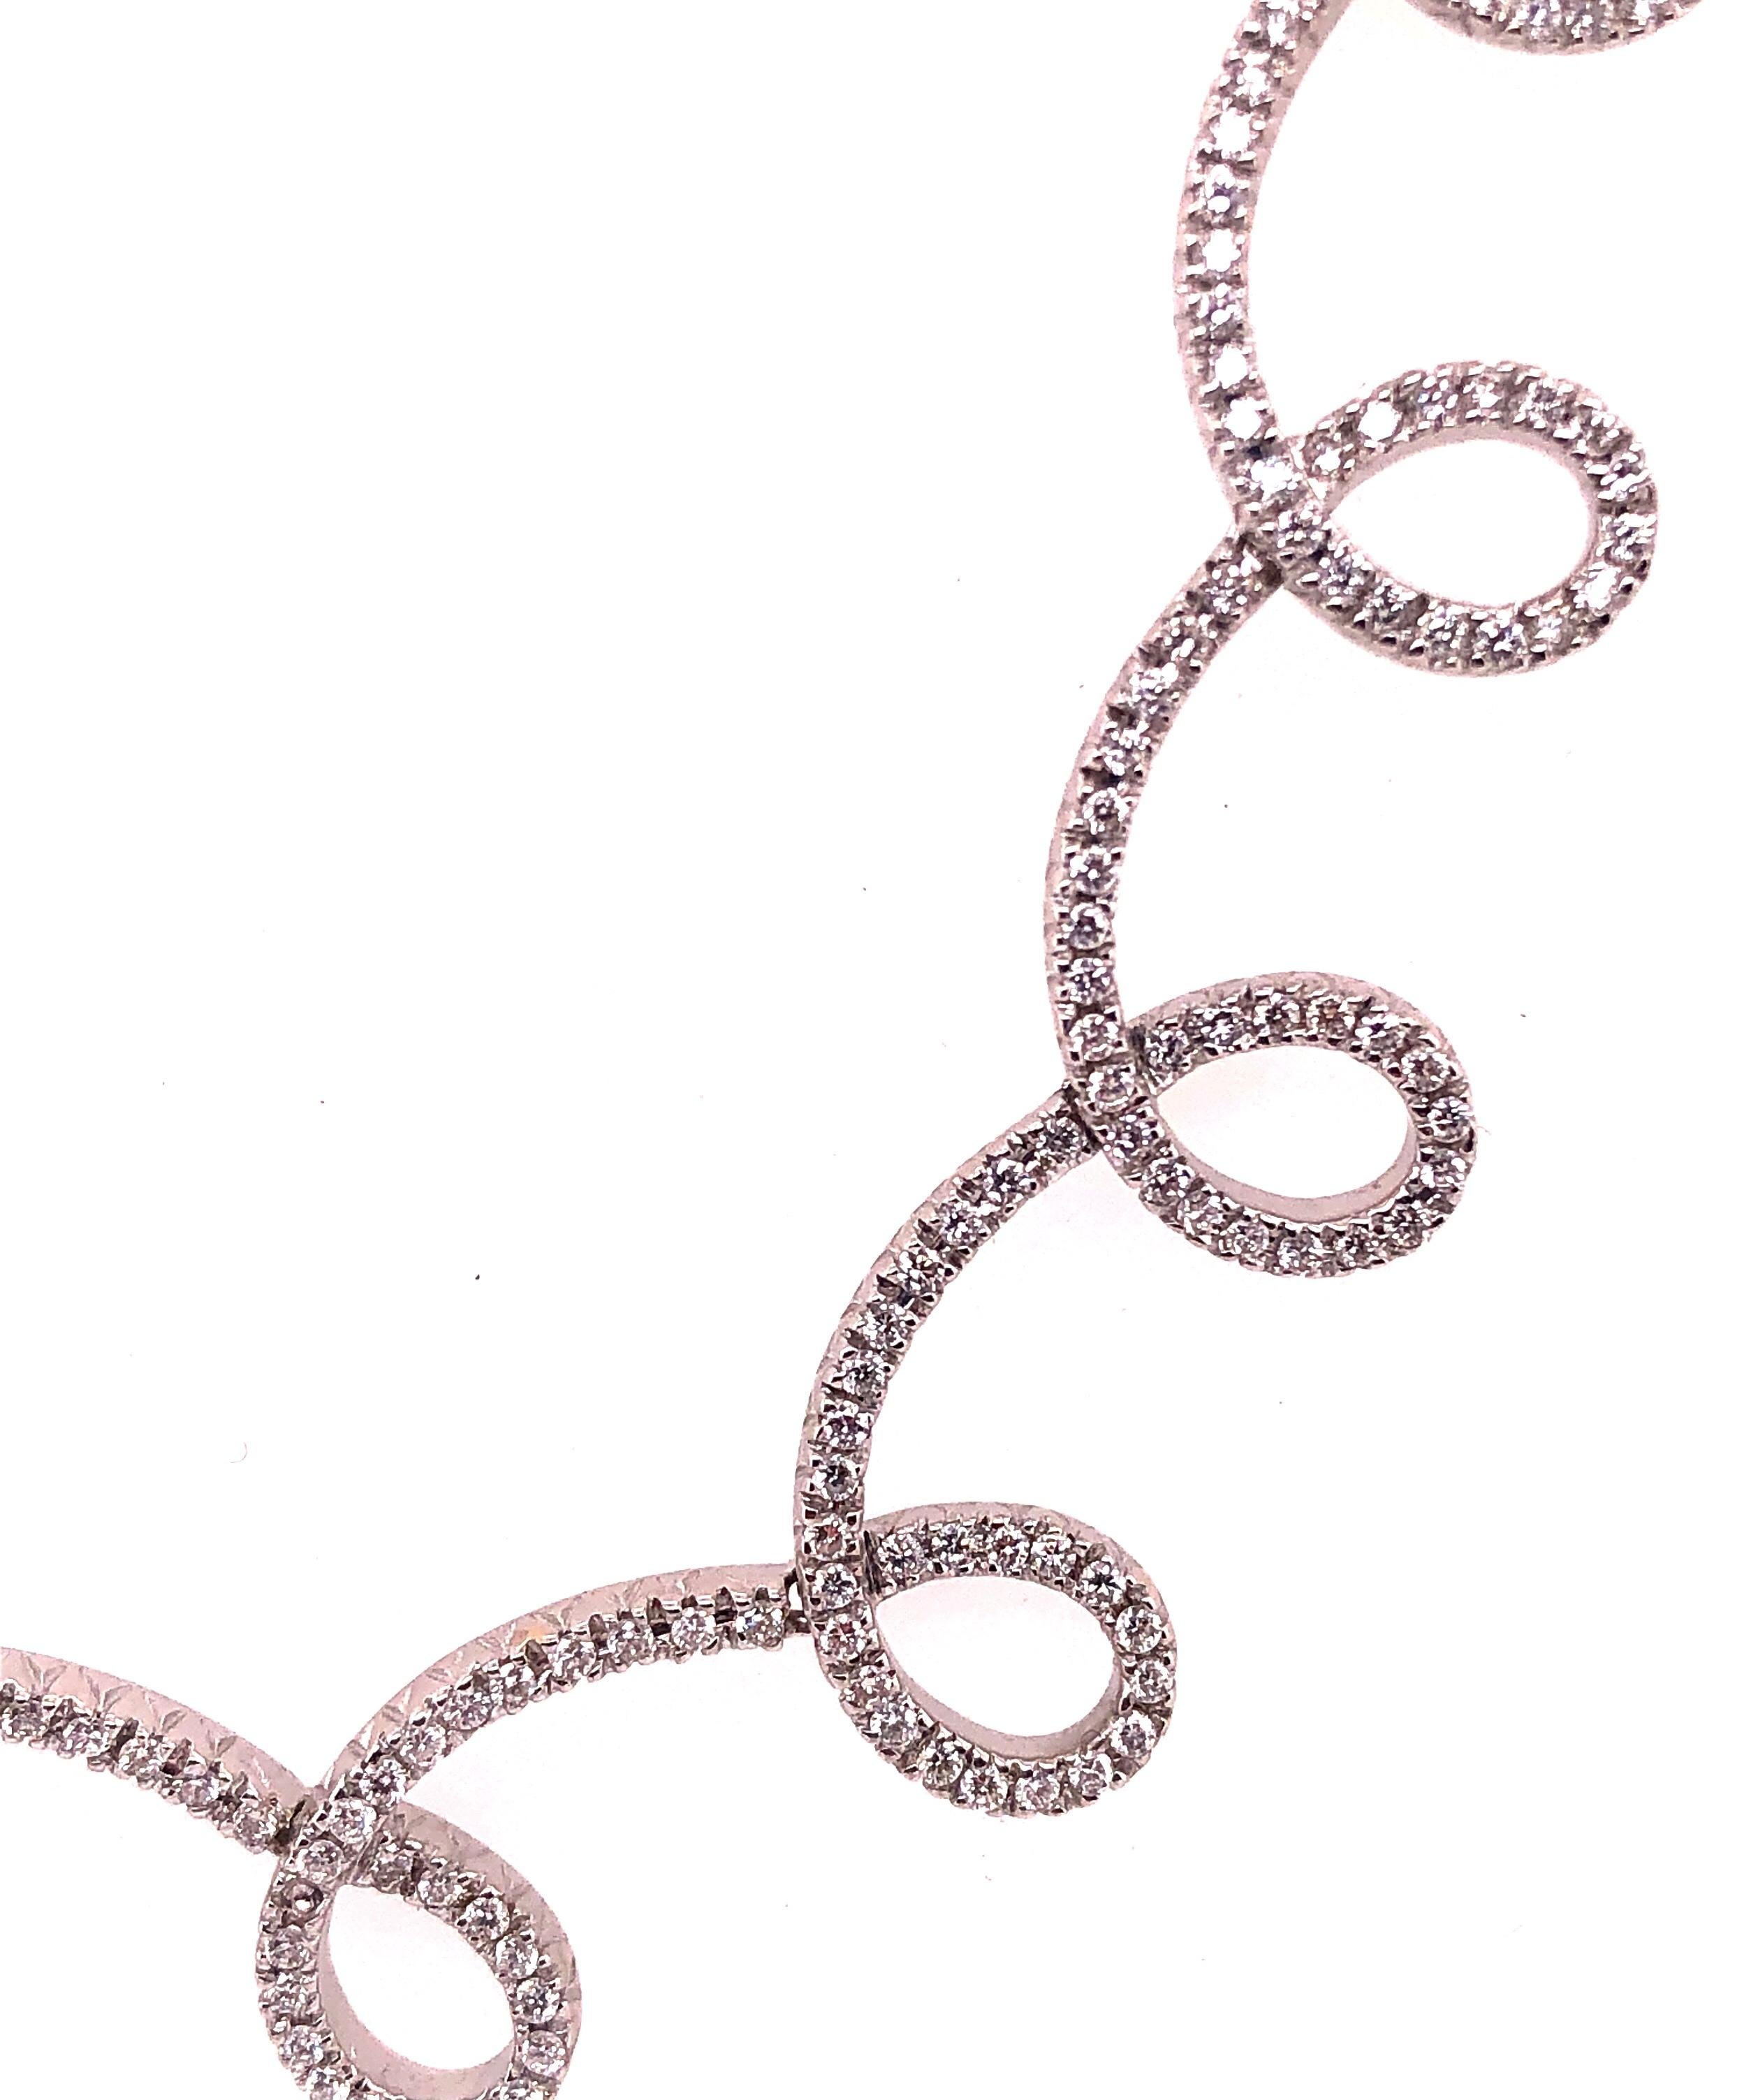 Women's or Men's 18 Karat White Gold and Diamond Swirl Necklace by H2 at Hammerman For Sale